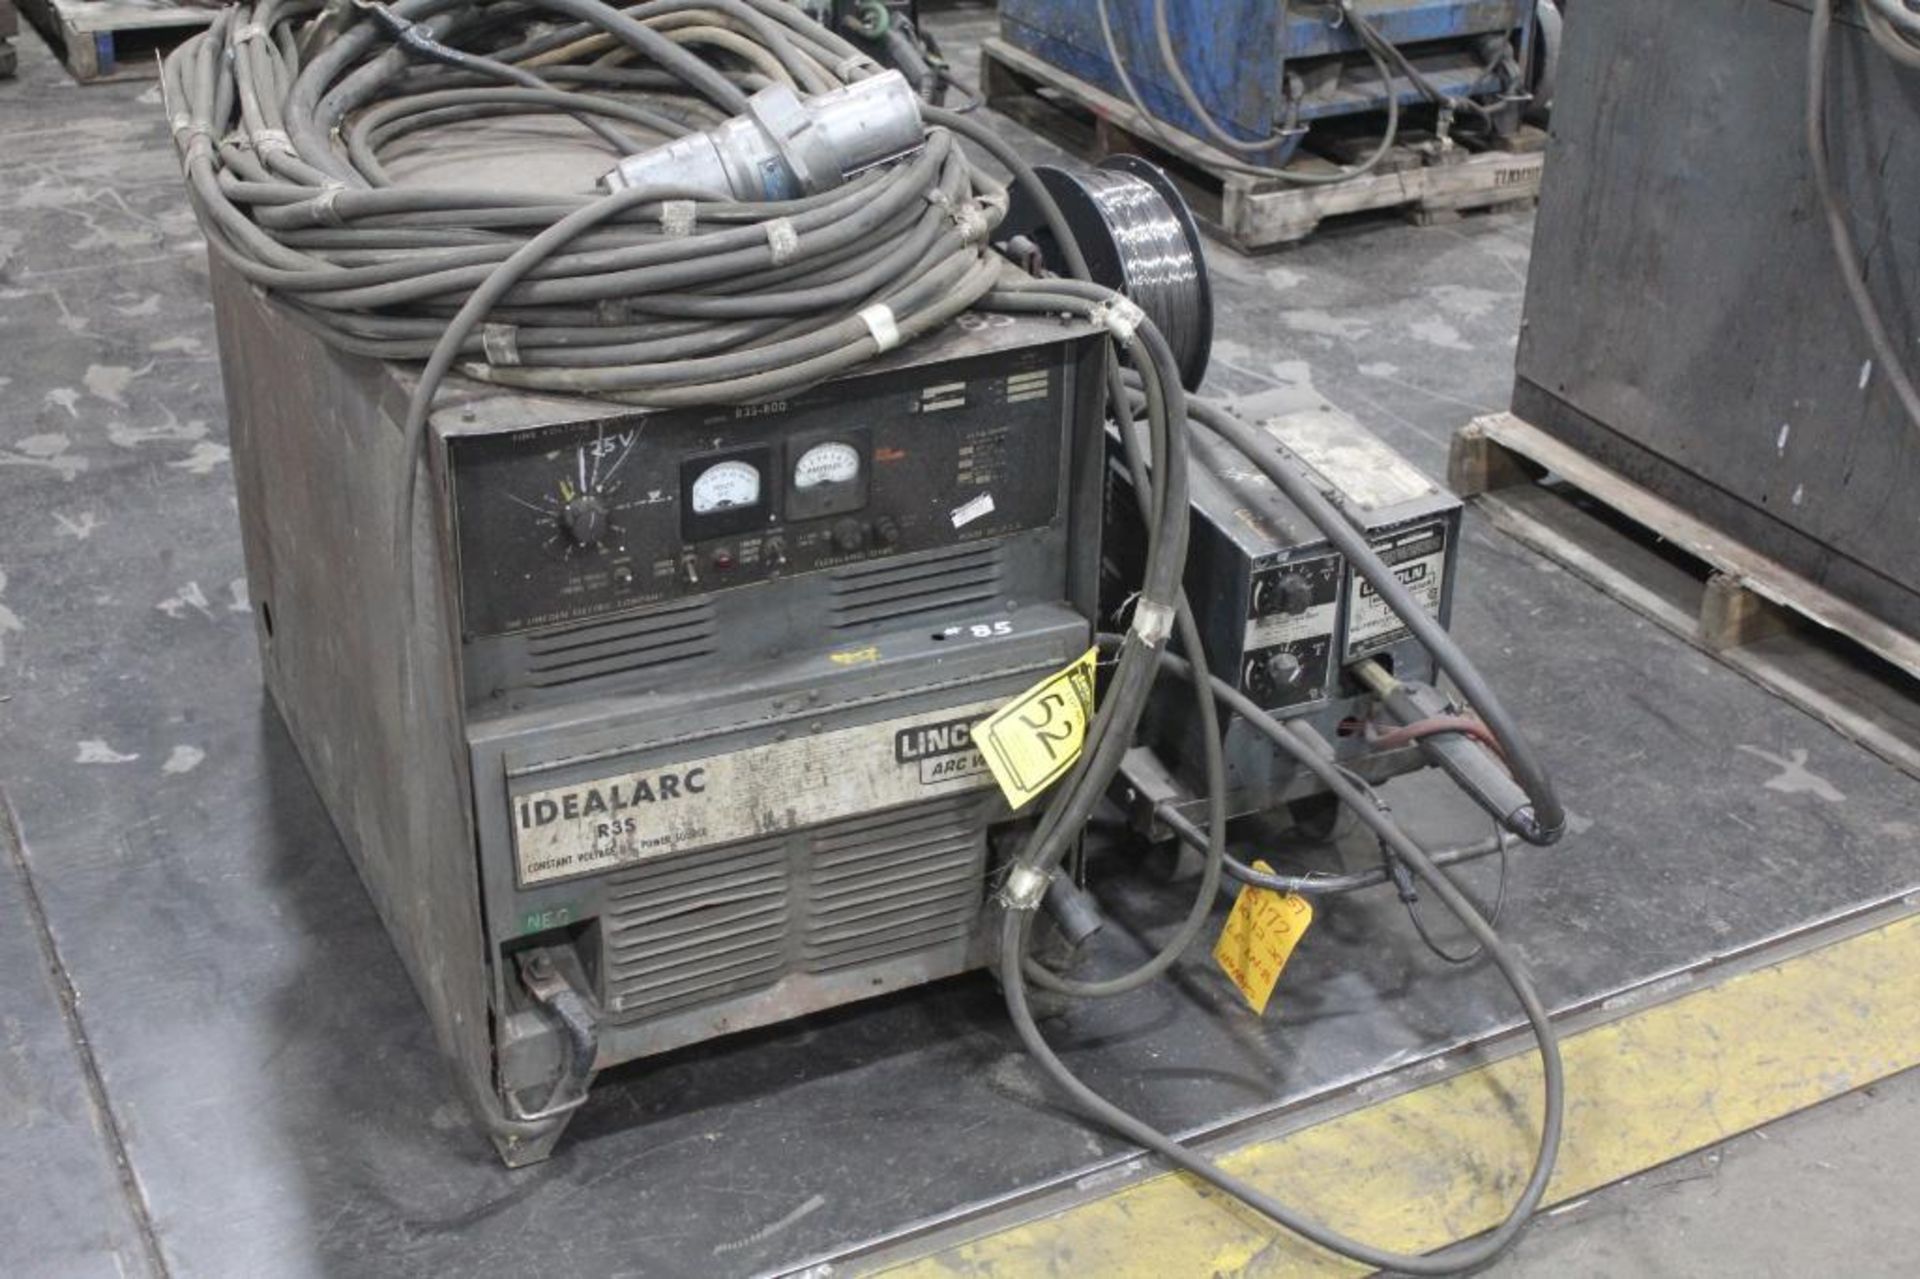 LINCOLN ELECTRIC IDEALARC DC-600 WELDER SN.AC292177 230-460V WITH LN-8 WIRE FEED SN.184815 115V